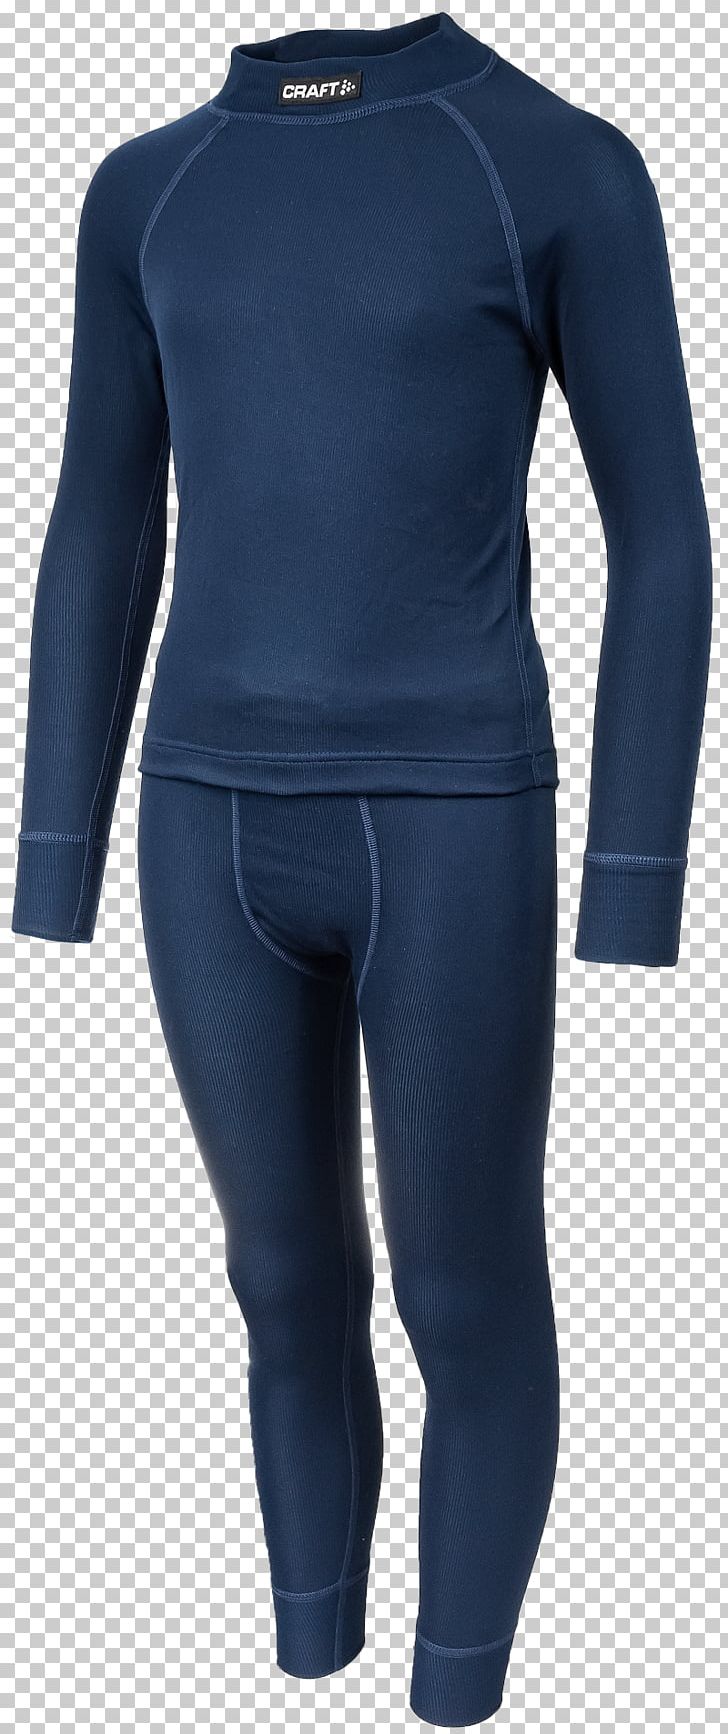 T-shirt Wetsuit Sleeve Clothing Underpants PNG, Clipart, Child Sport Sea, Clothing, Cobalt Blue, Electric Blue, Inline Skating Free PNG Download